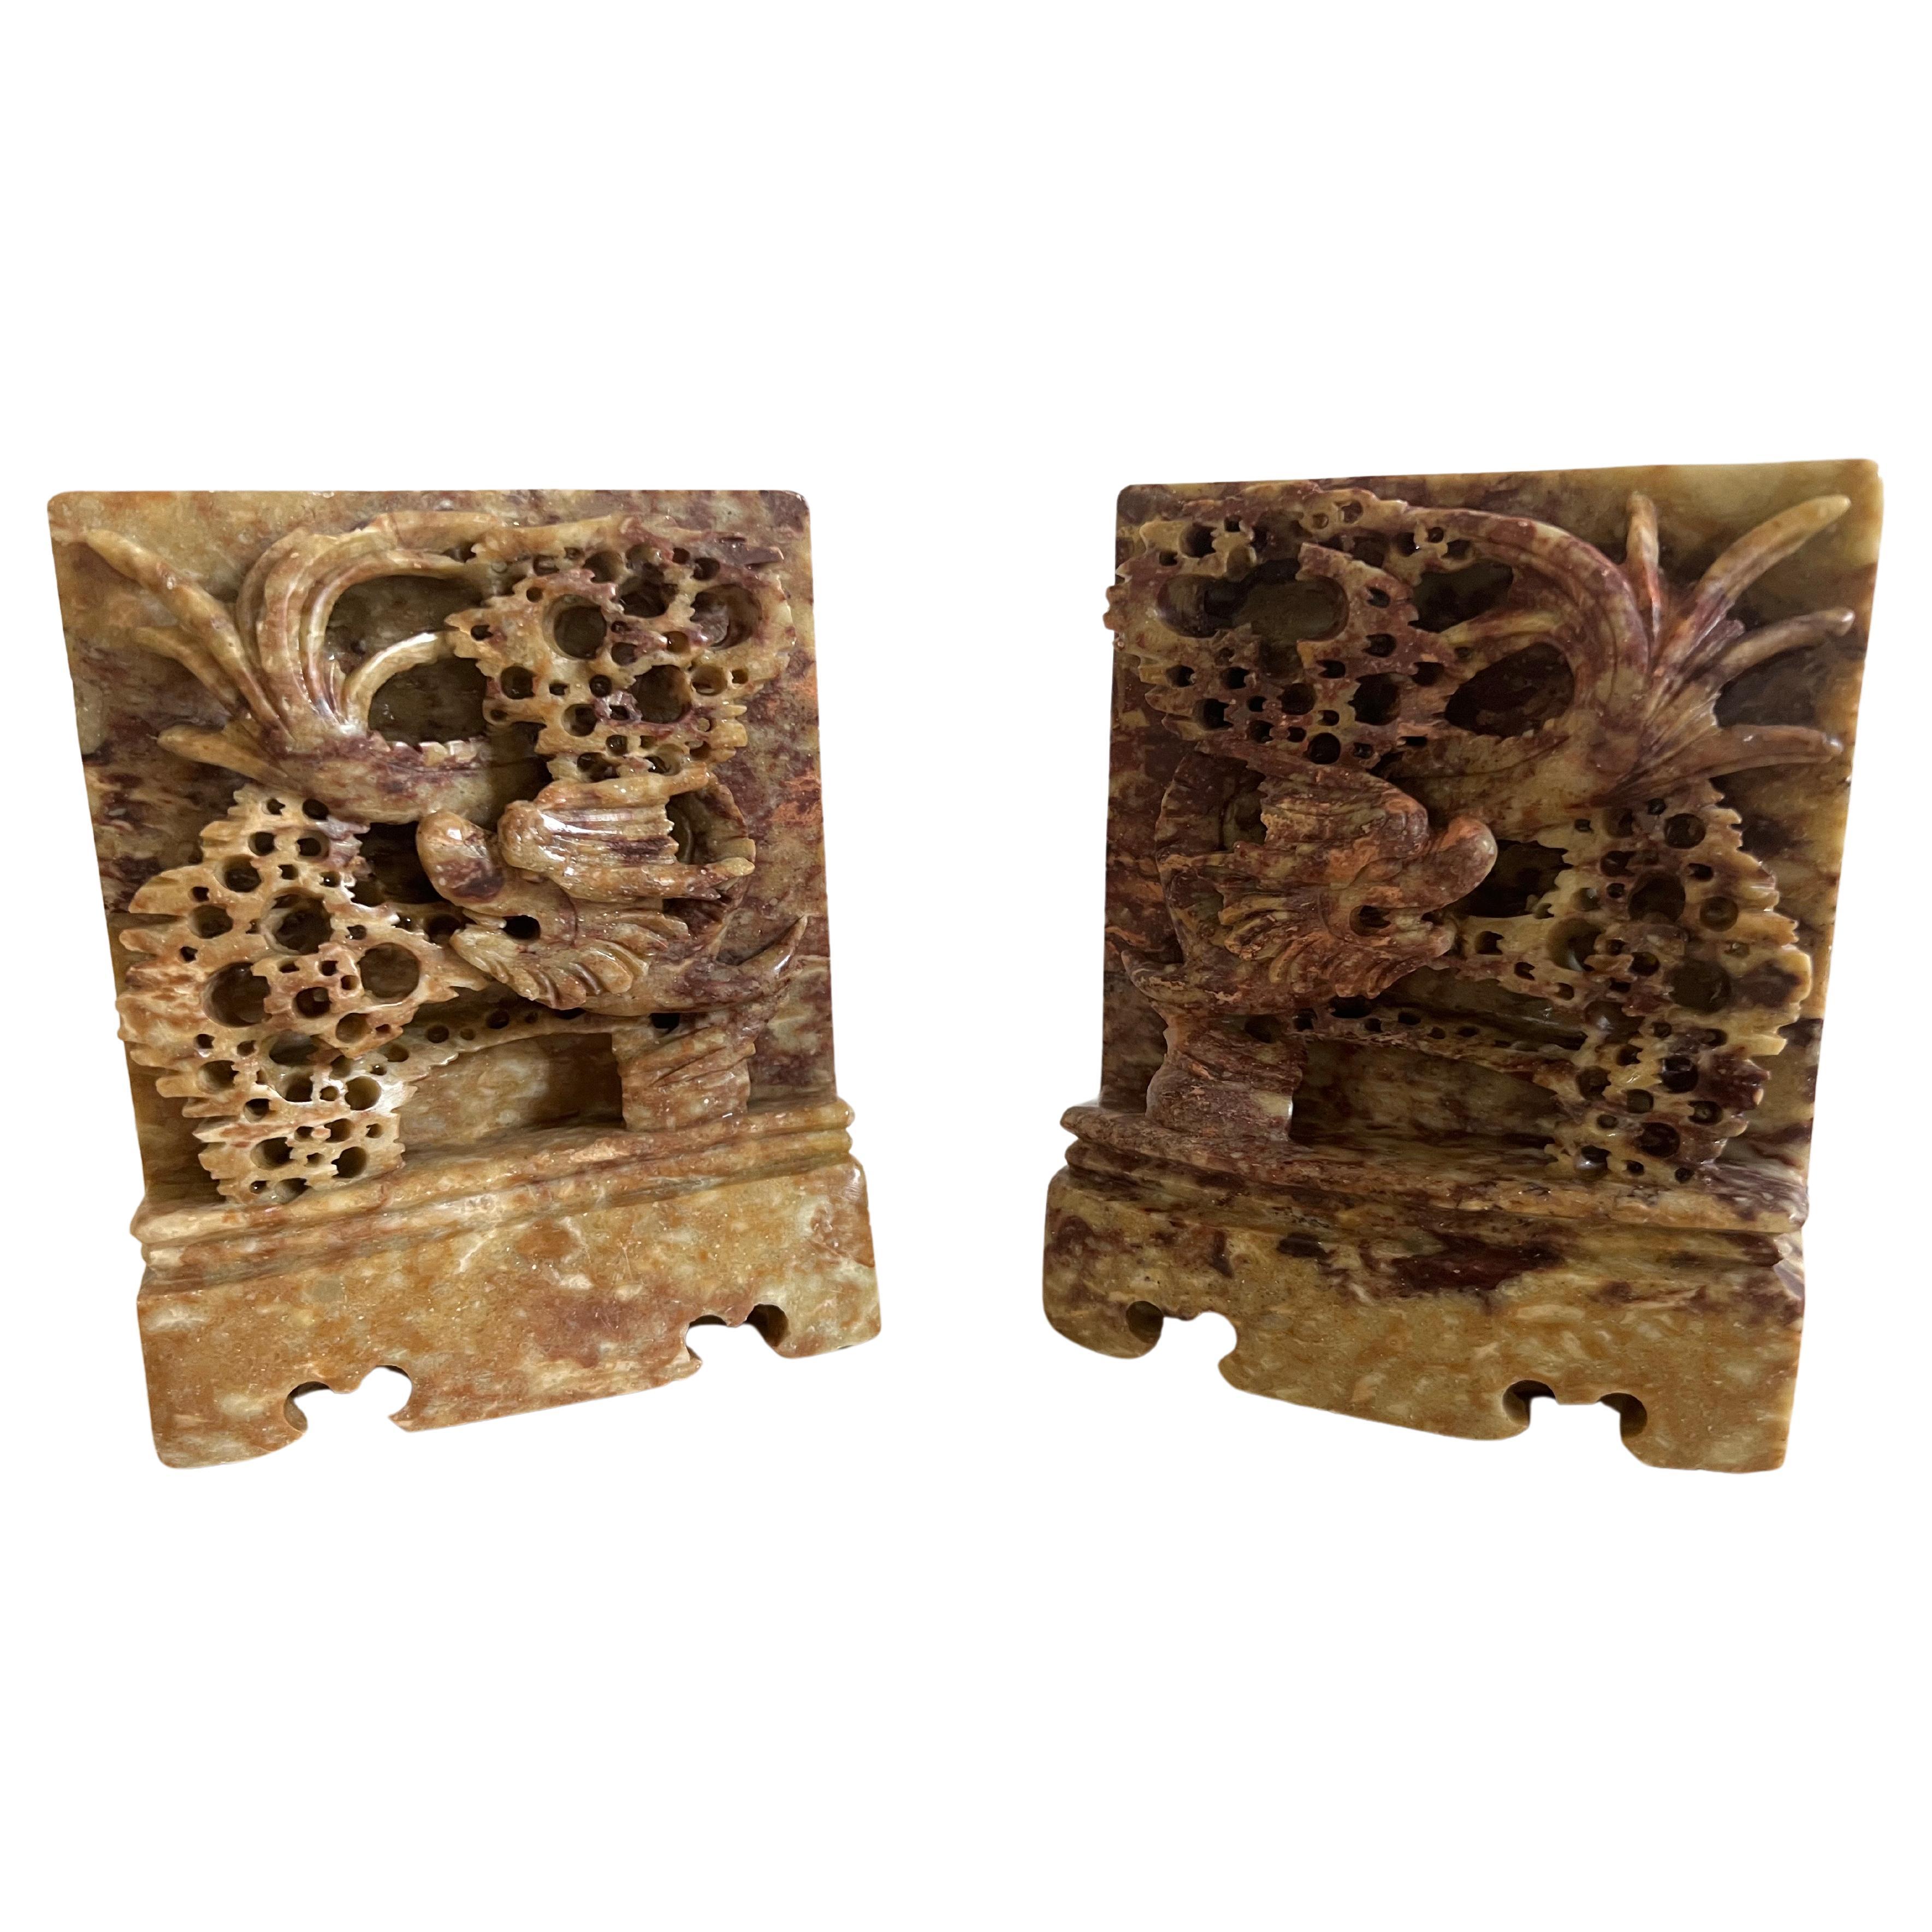 A pair of finely hand-carved soap stone bookends featuring high relief landscape scenes with dragon heads. Perfect to use on a desk as a paper weight or decorative object around the house or office. Highly decorative and fitting for any interior